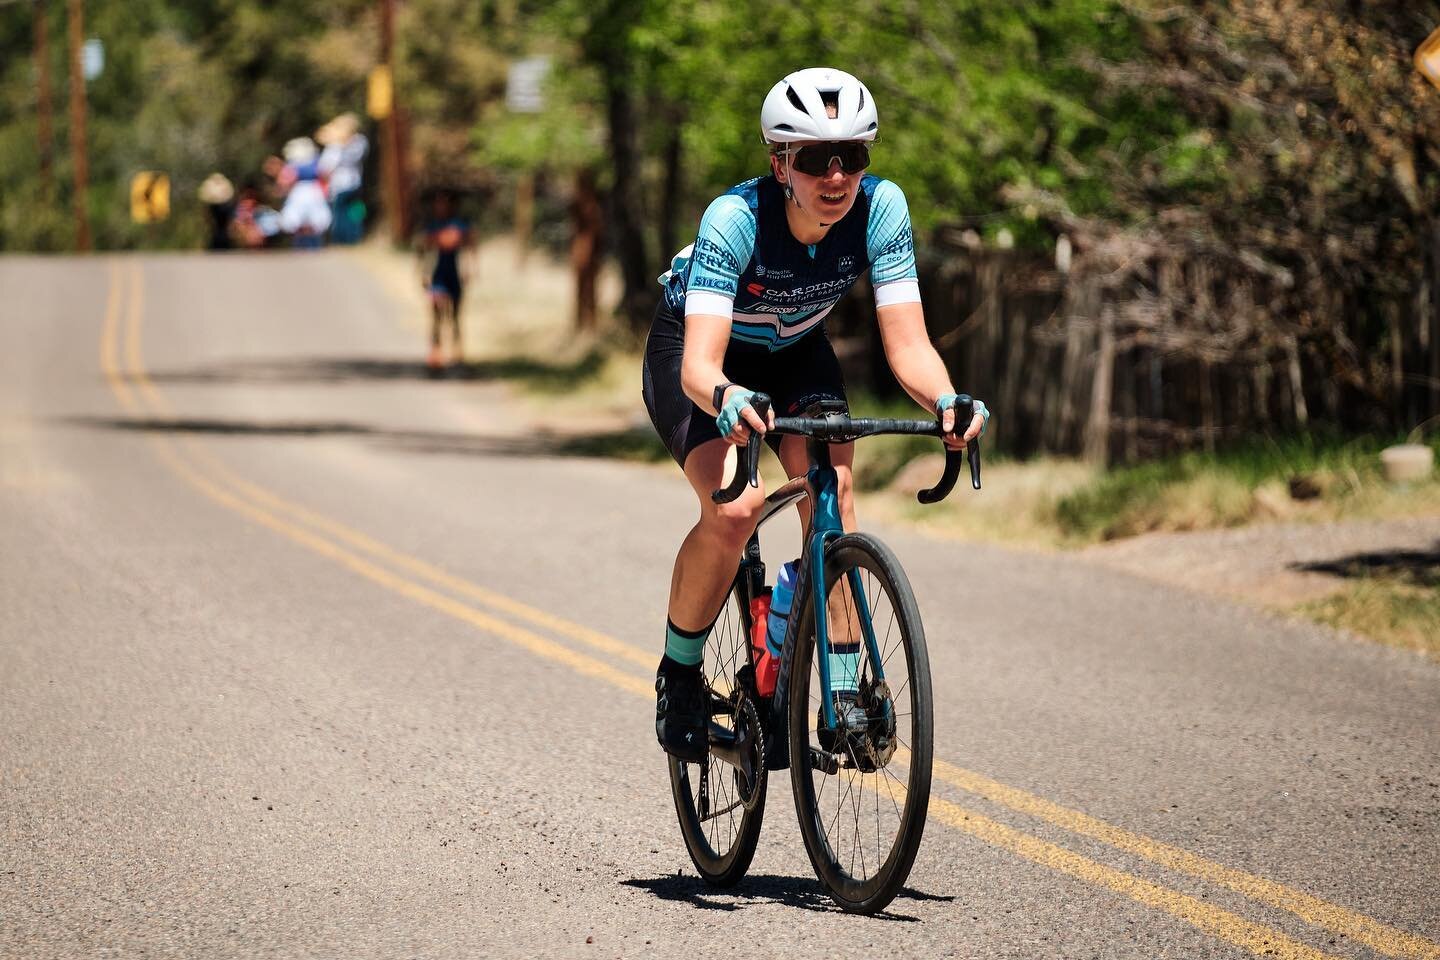 @tourofthegila Stage 5 certainly lived up to its name.

Stages this brutal always show us how important team is. Anna selflessly pulled and motivated Florence up the Gila monster after loosing contact with the front group to keep her top 15 on GC.
Th